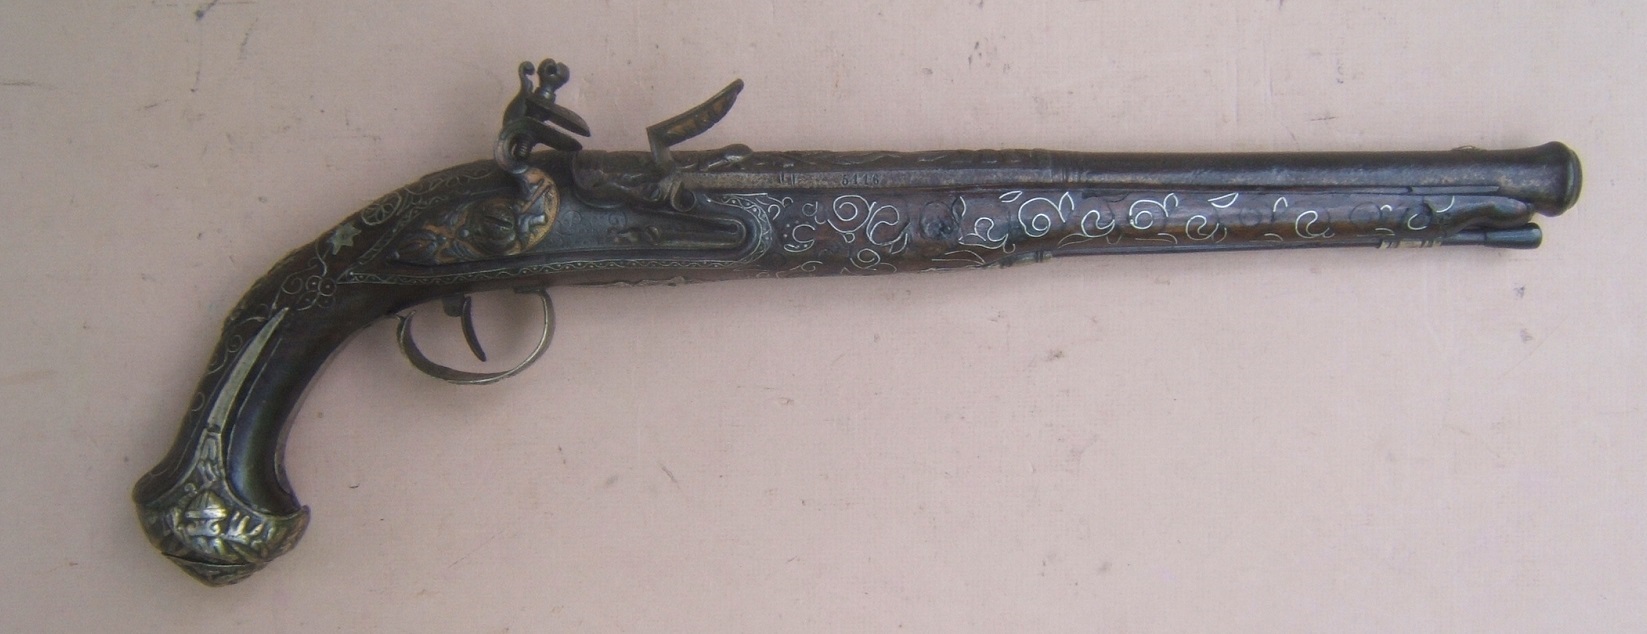 A VERY FINE QUALITY FRENCH SILVER MOUNTED & GOLD DAMASCENED FLINTLOCK HOLSTER PISTOL, by “PEYRTE DUMAREST” (FOR EASTERN/TURKISH MARKET, ca. 1780 view1